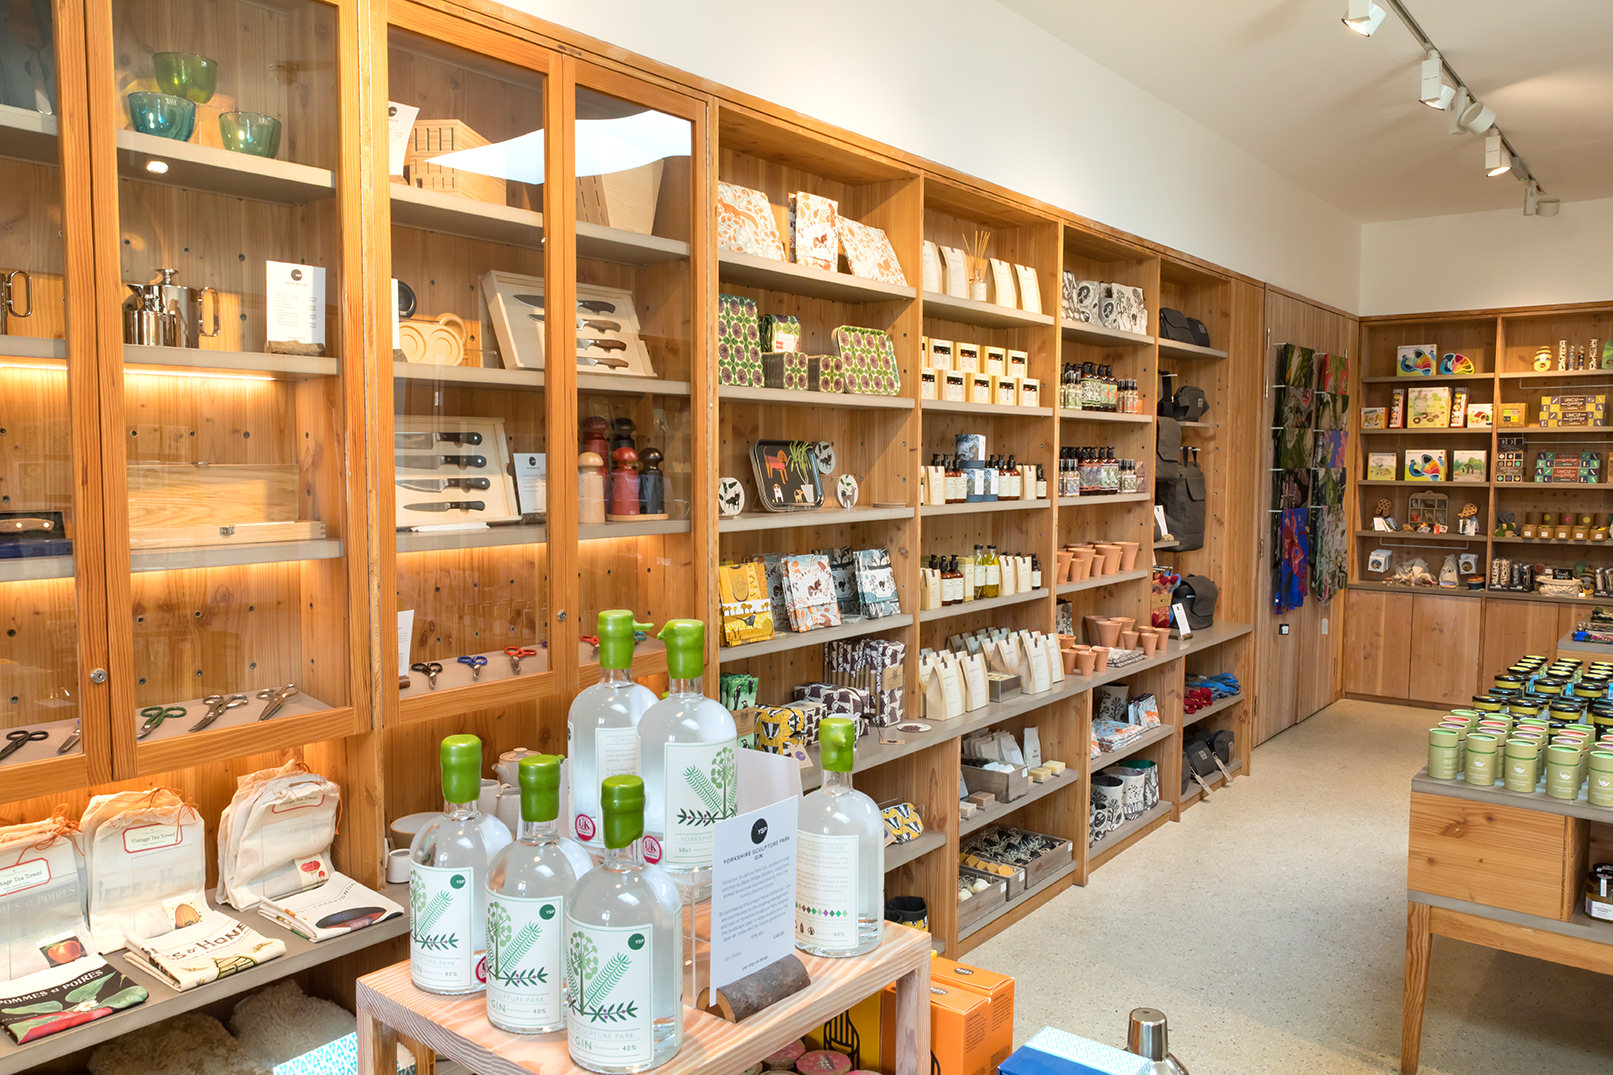 Shelving displays of products in YSP Shop at The Weston.